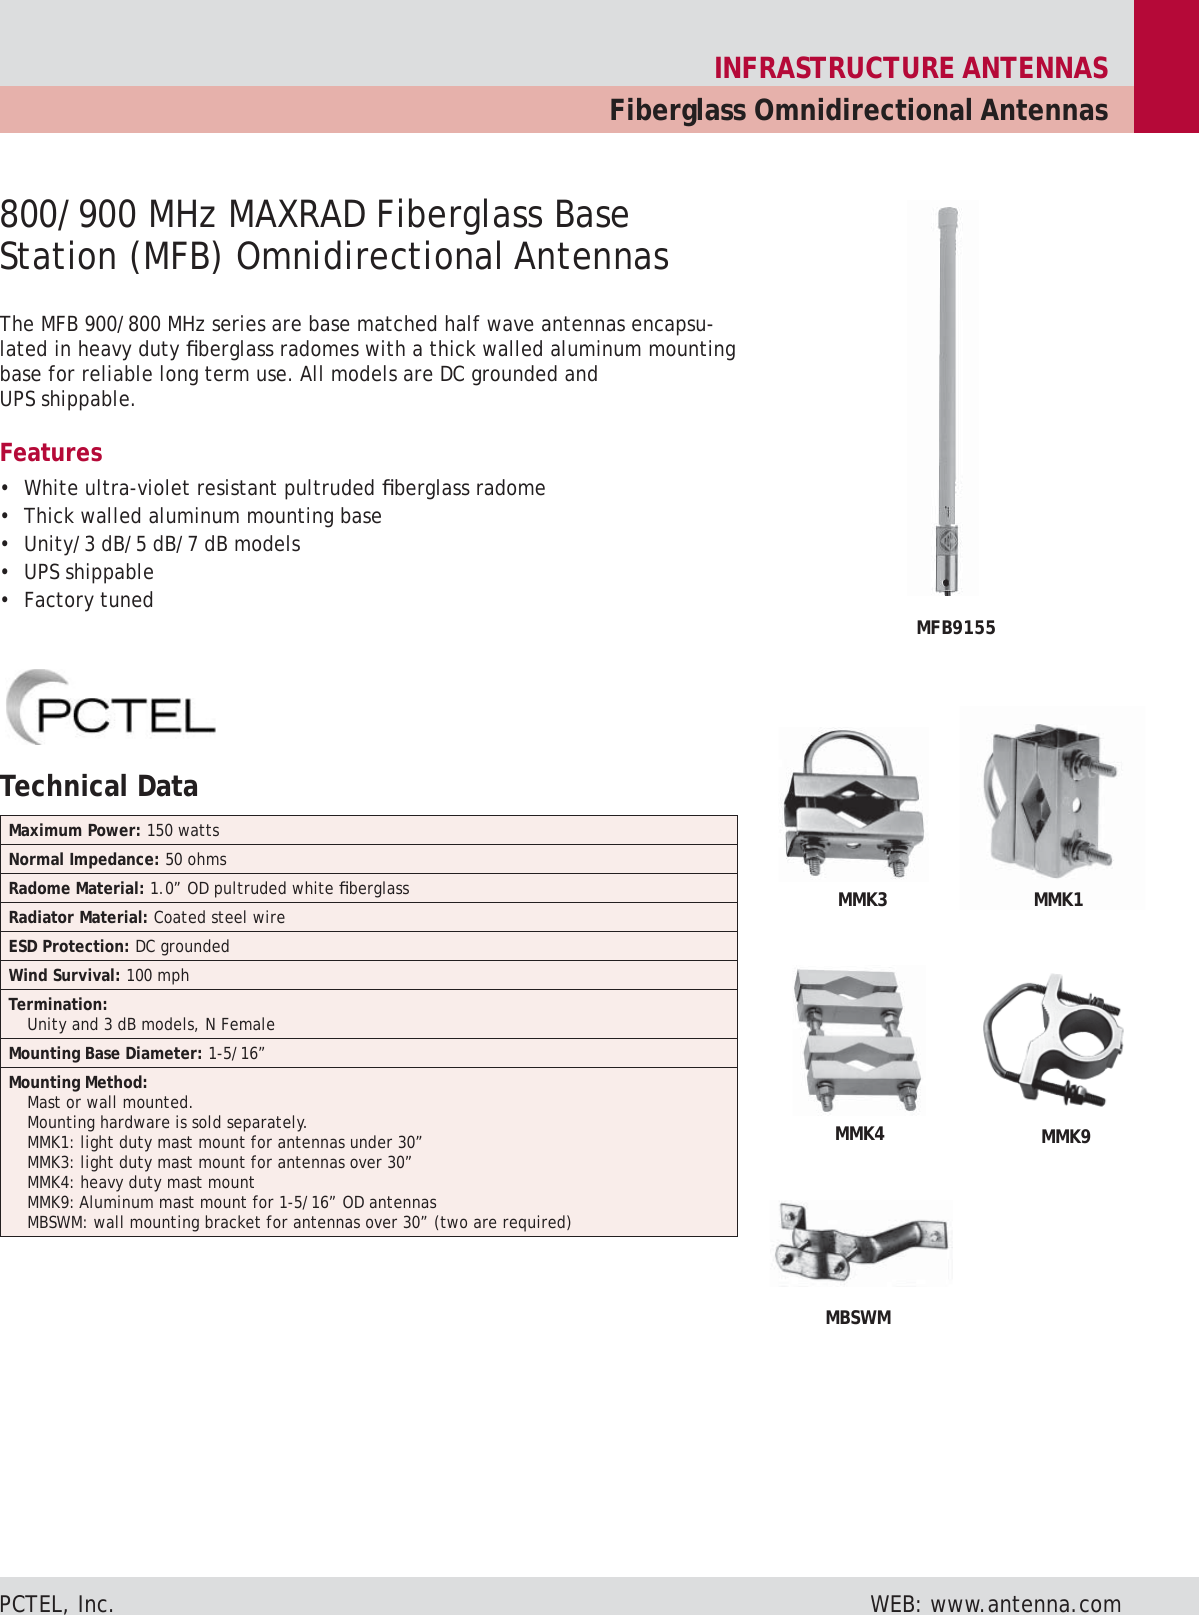 INFRASTRUCTURE ANTENNASFiberglass Omnidirectional AntennasPCTEL, Inc.      WEB: www.antenna.comThe MFB 900/800 MHz series are base matched half wave antennas encapsu-lated in heavy duty ﬁ berglass radomes with a thick walled aluminum mounting base for reliable long term use. All models are DC grounded and UPS ship pa ble.Features•  White ultra-violet resistant pultruded ﬁ berglass radome•  Thick walled aluminum mounting base•  Unity/3 dB/5 dB/7 dB models• UPS shippable• Factory tuned800/900 MHz MAXRAD Fiberglass Base Station (MFB) Omnidirectional AntennasMMK4MBSWMMMK9MMK3 MMK1MFB9155Technical Data Maximum Power: 150 wattsNormal Impedance: 50 ohmsRadome Material: 1.0” OD pultruded white ﬁ berglassRadiator Material: Coated steel wireESD Protection: DC groundedWind Survival: 100 mphTermination:Unity and 3 dB models, N FemaleMounting Base Diameter: 1-5/16”Mounting Method:Mast or wall mounted.Mounting hardware is sold separately.MMK1: light duty mast mount for antennas under 30”MMK3: light duty mast mount for antennas over 30”MMK4: heavy duty mast mountMMK9: Aluminum mast mount for 1-5/16” OD antennasMBSWM: wall mounting bracket for antennas over 30” (two are required)